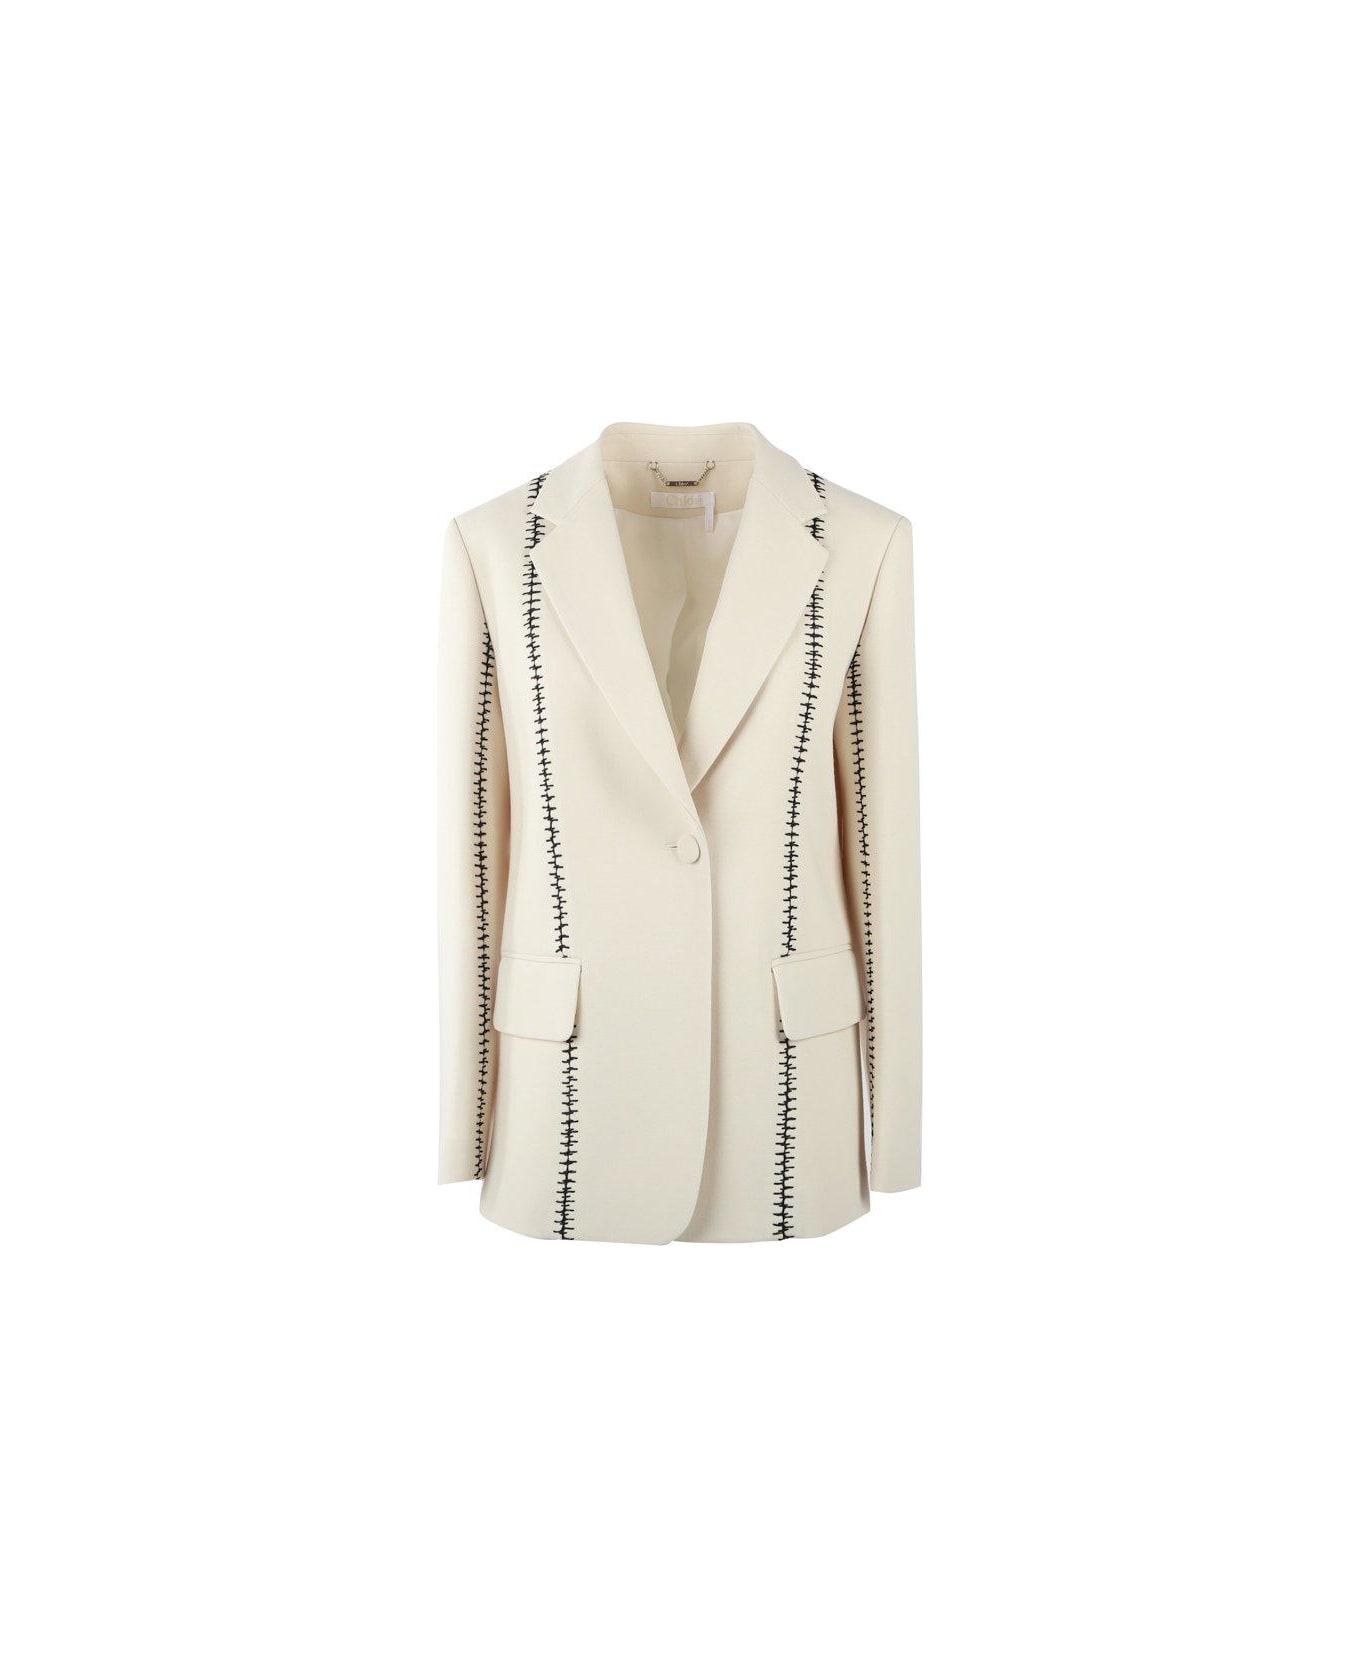 Chloé Embroidered Single-breasted Jacket - Seedpearl beige